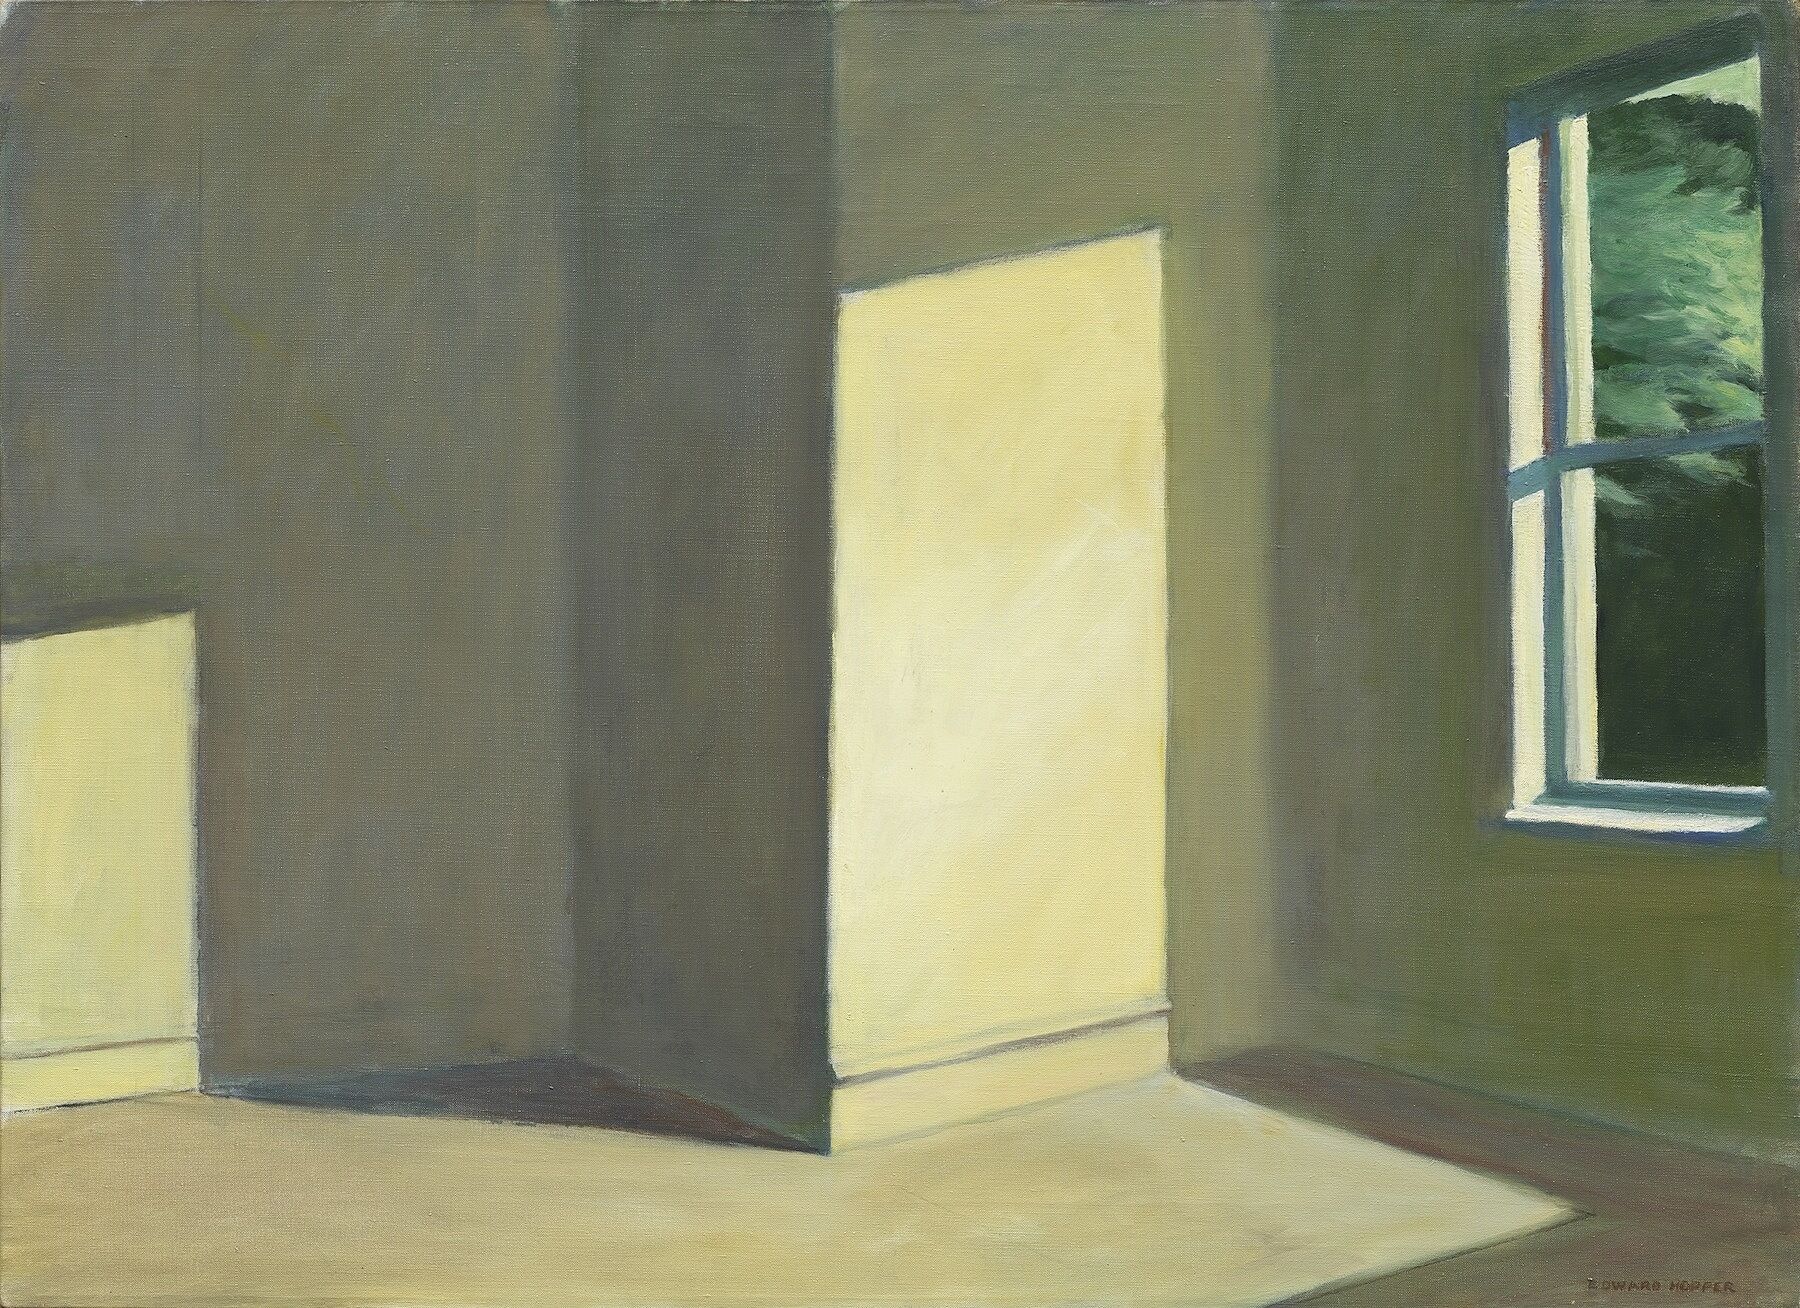 A painting of sunlight hitting the walls from the window in an empty room.